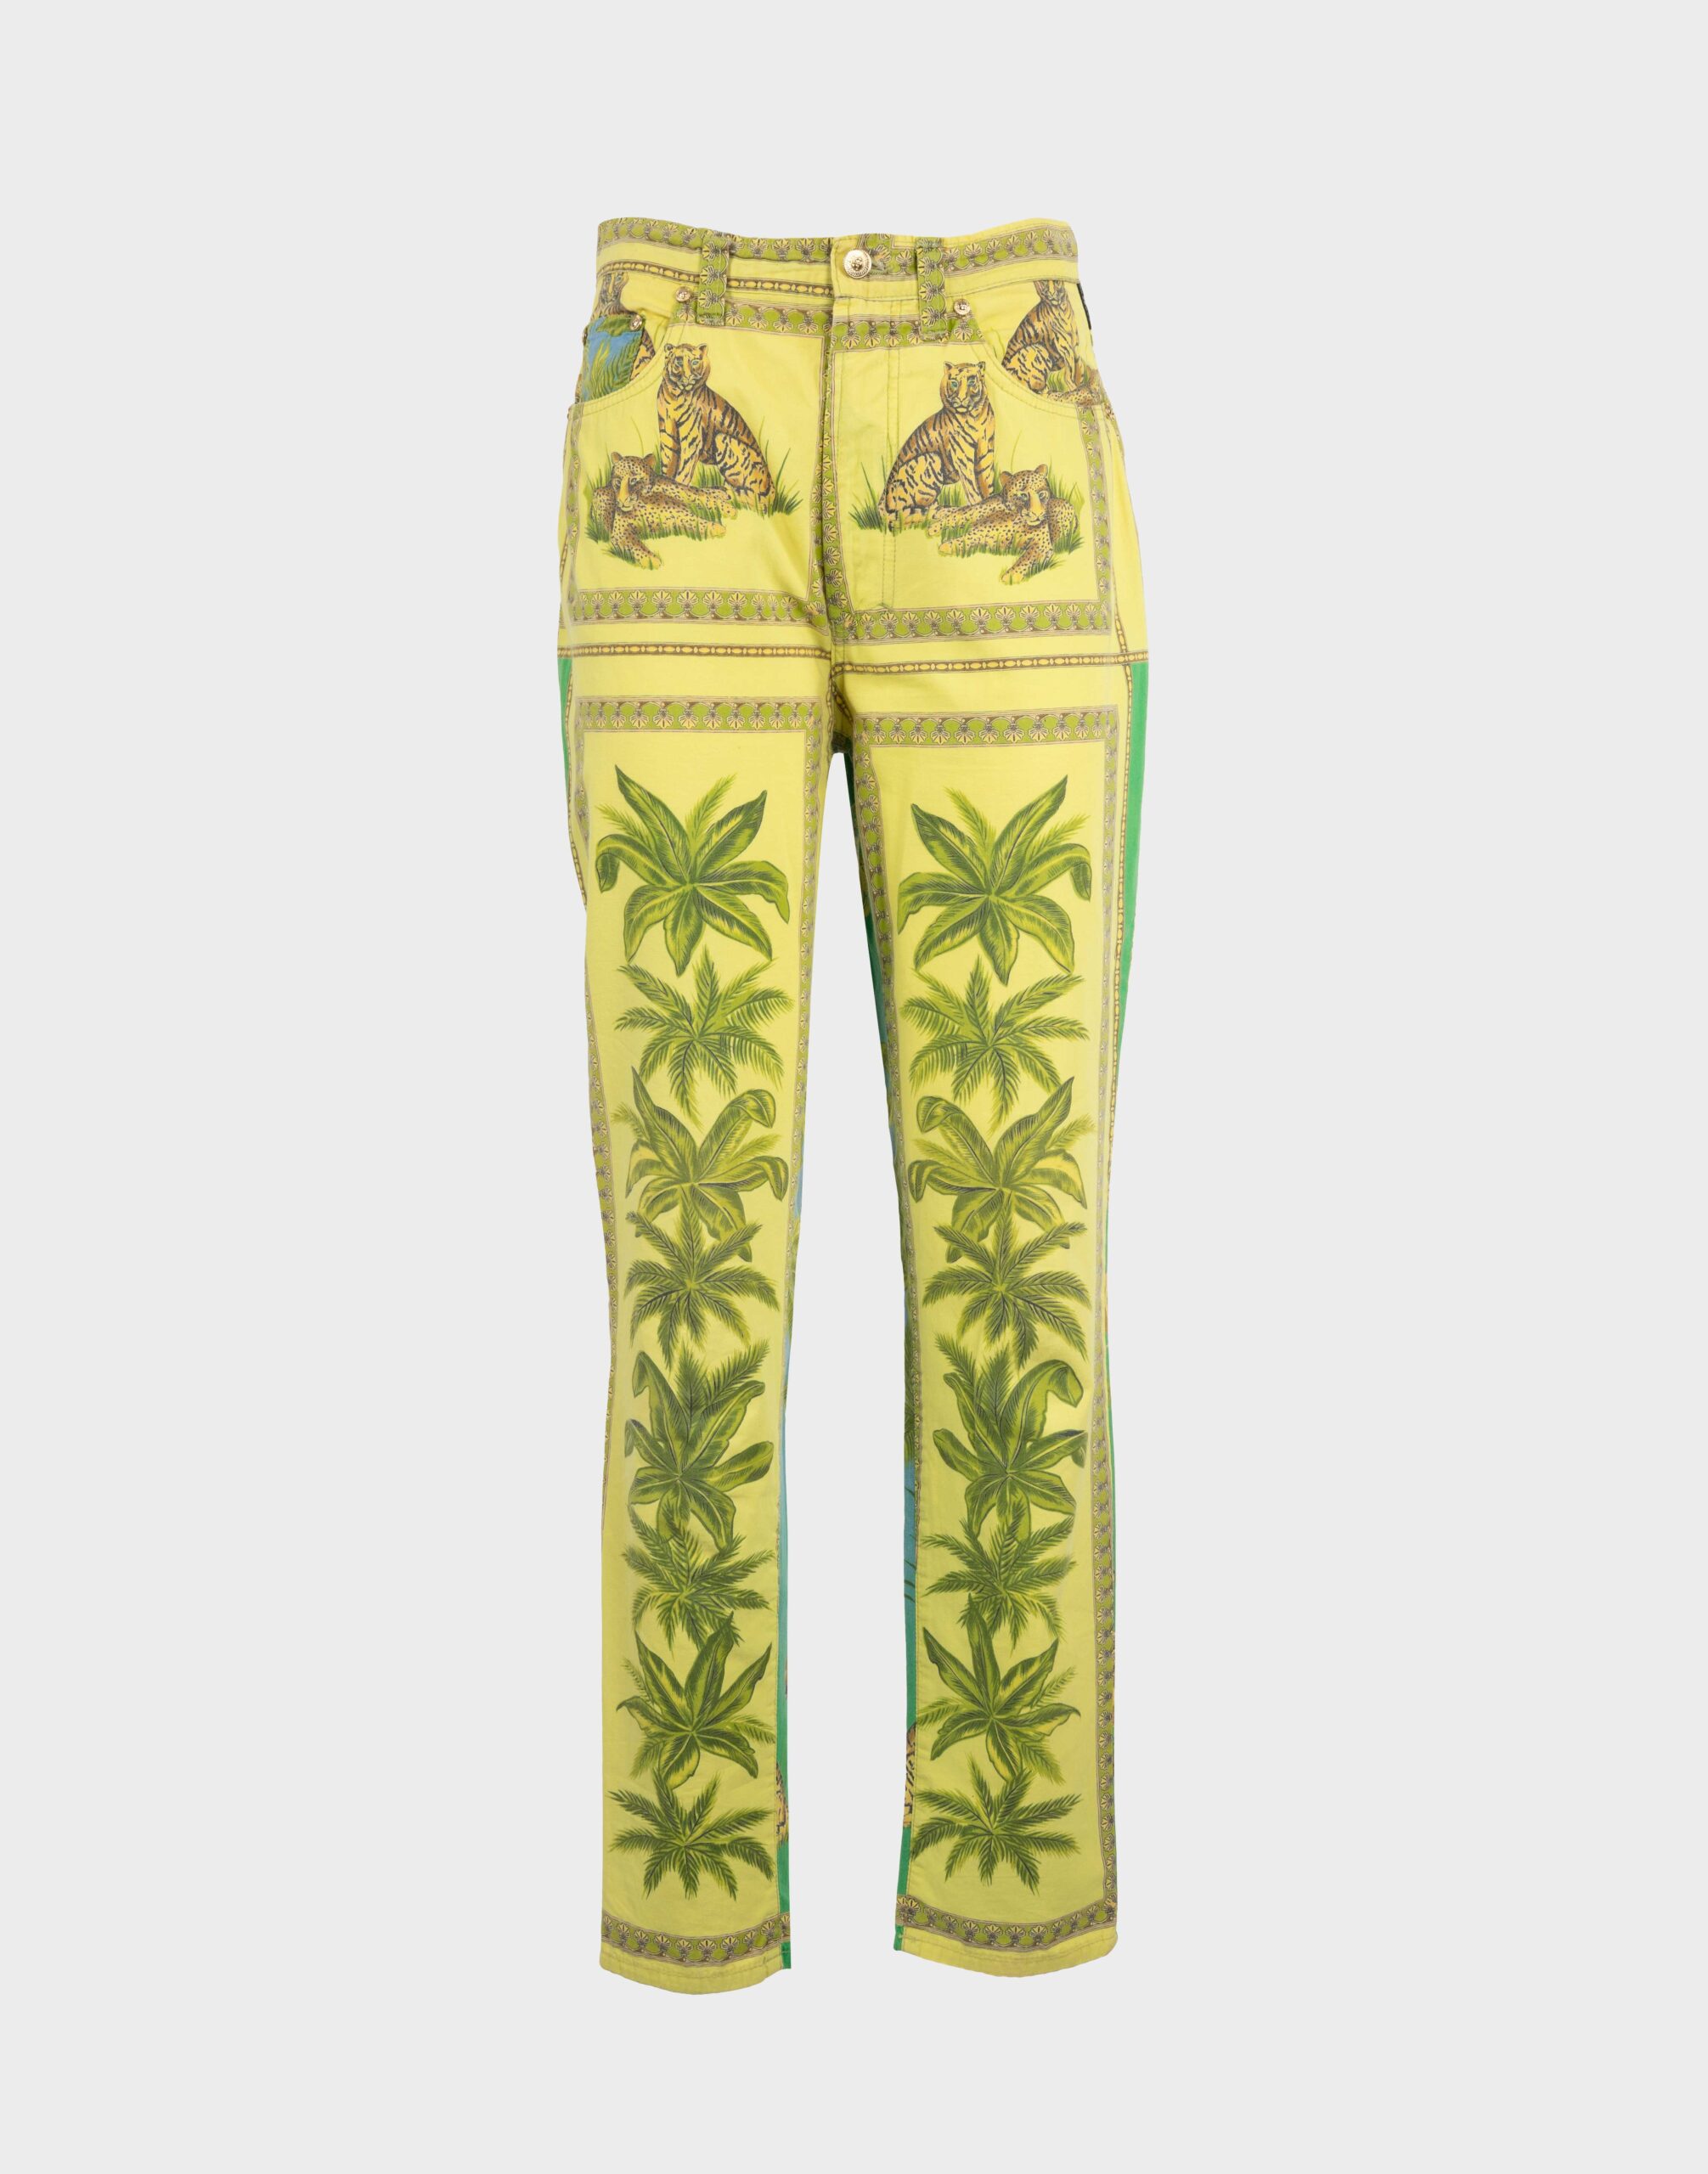 yellow and green high-waisted women's trousers with palm tree and tiger pattern